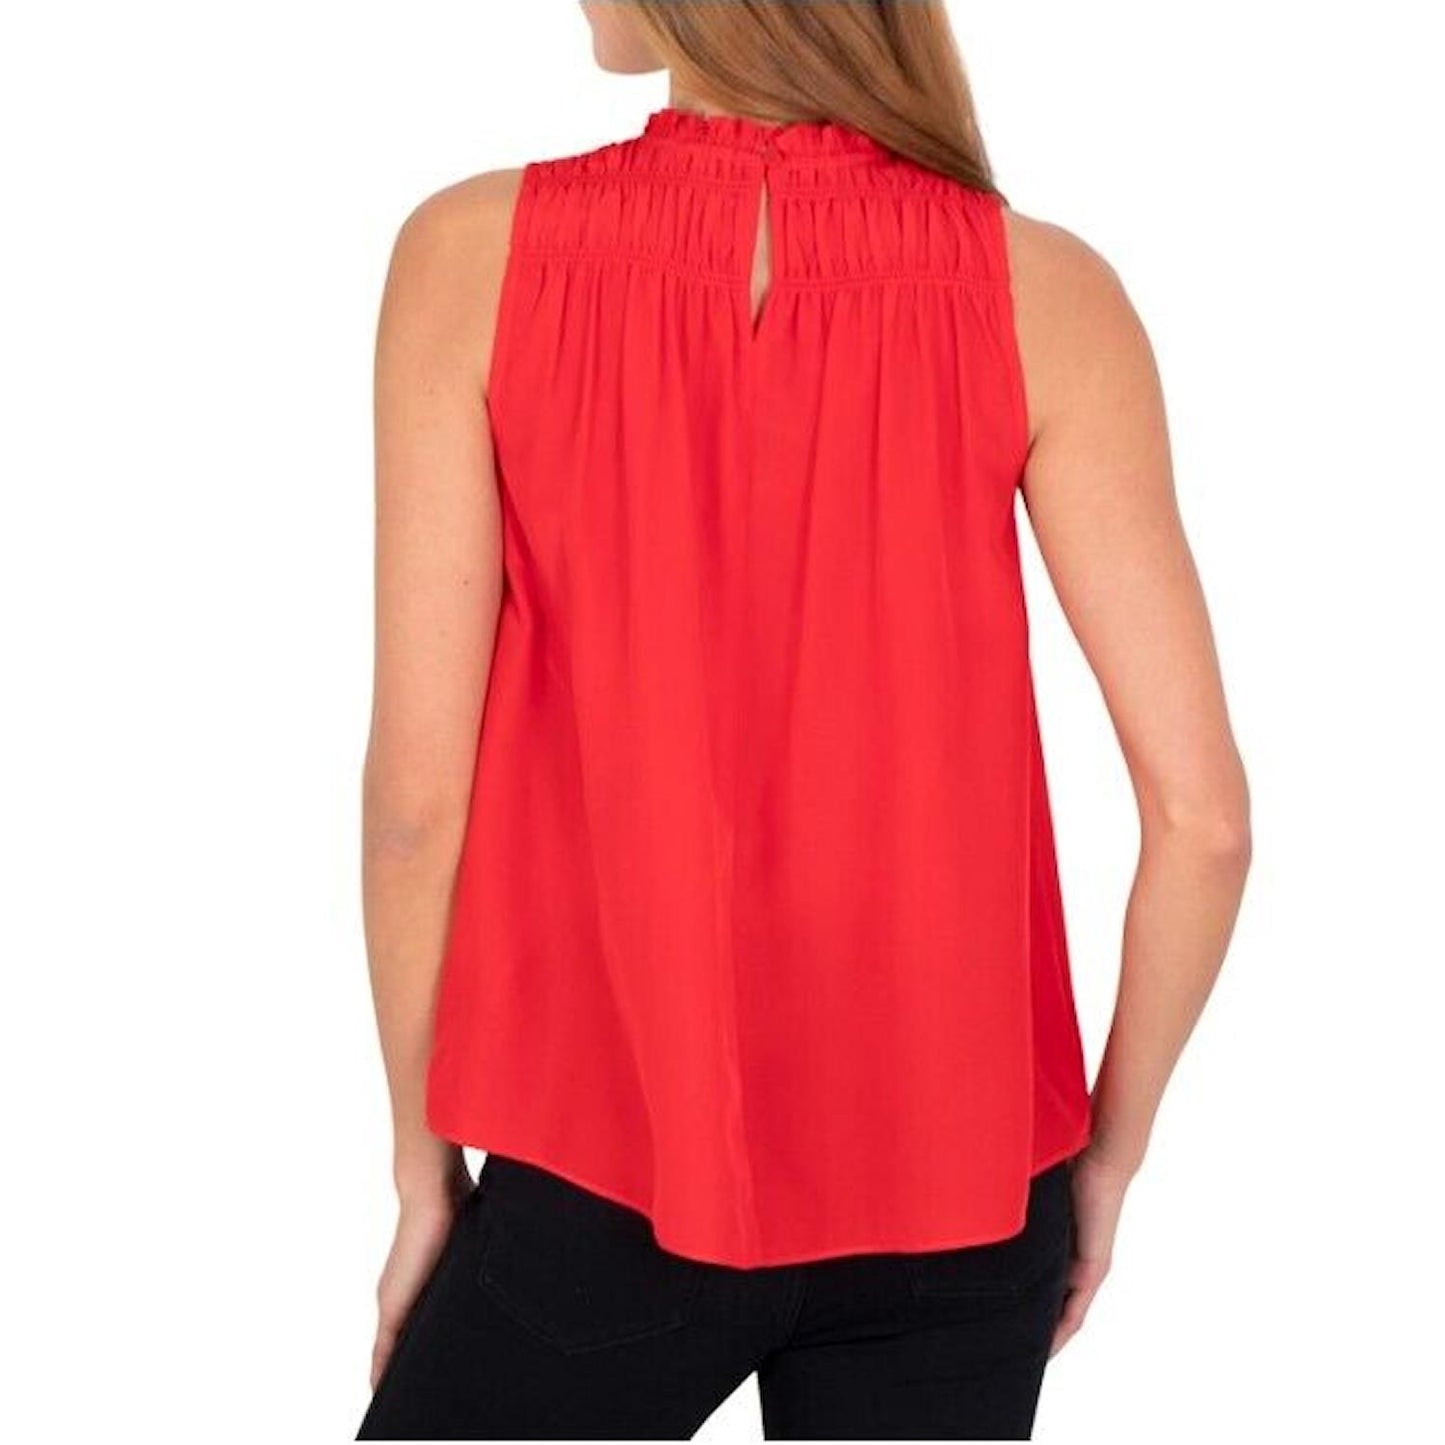 Joie Women's Limited Edition Ruffle High Neck Sleeveless Blouse Top